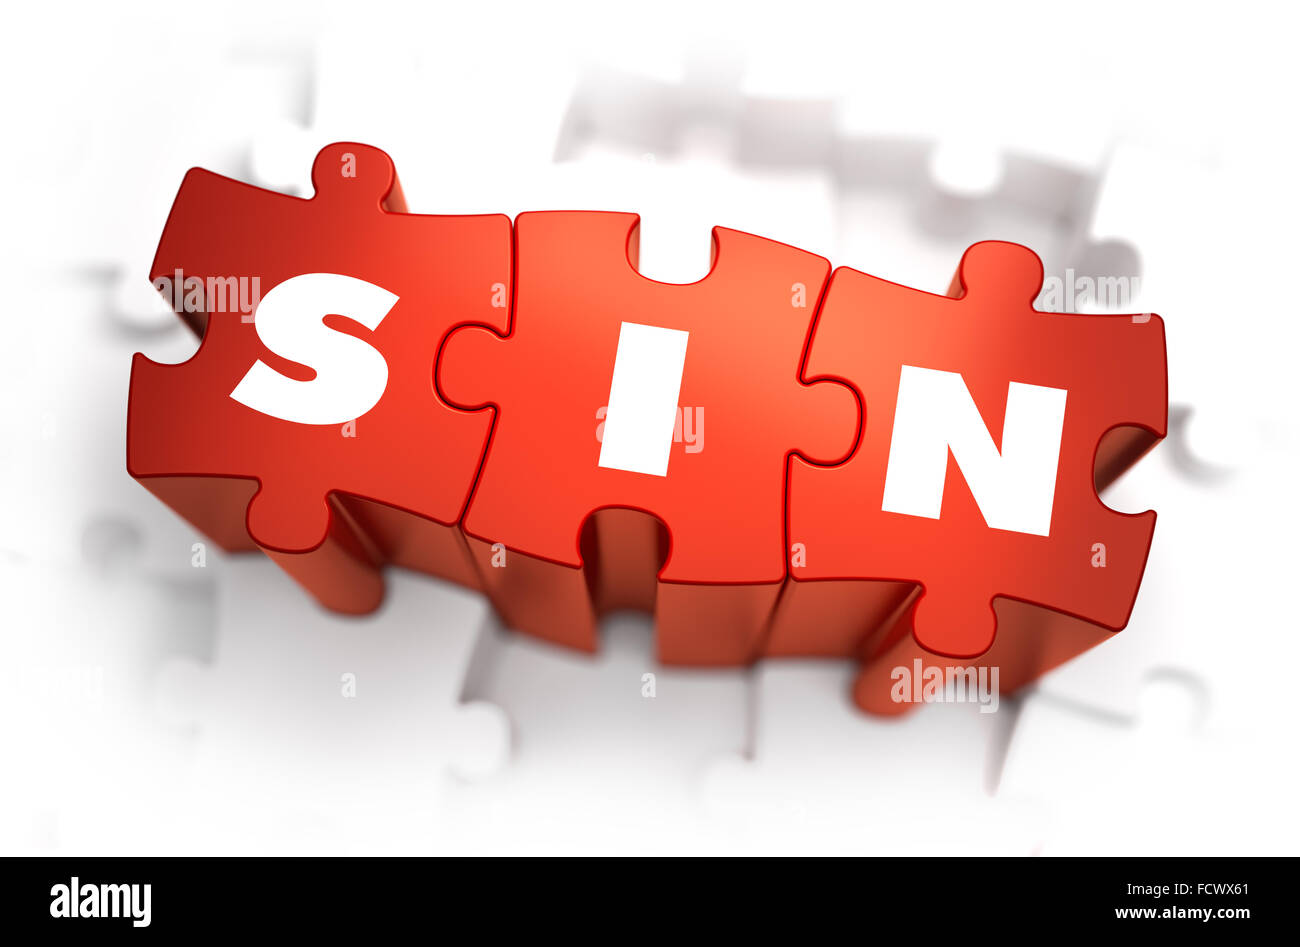 Sin - Text on Red Puzzles with White Background. 3D Render. Stock Photo